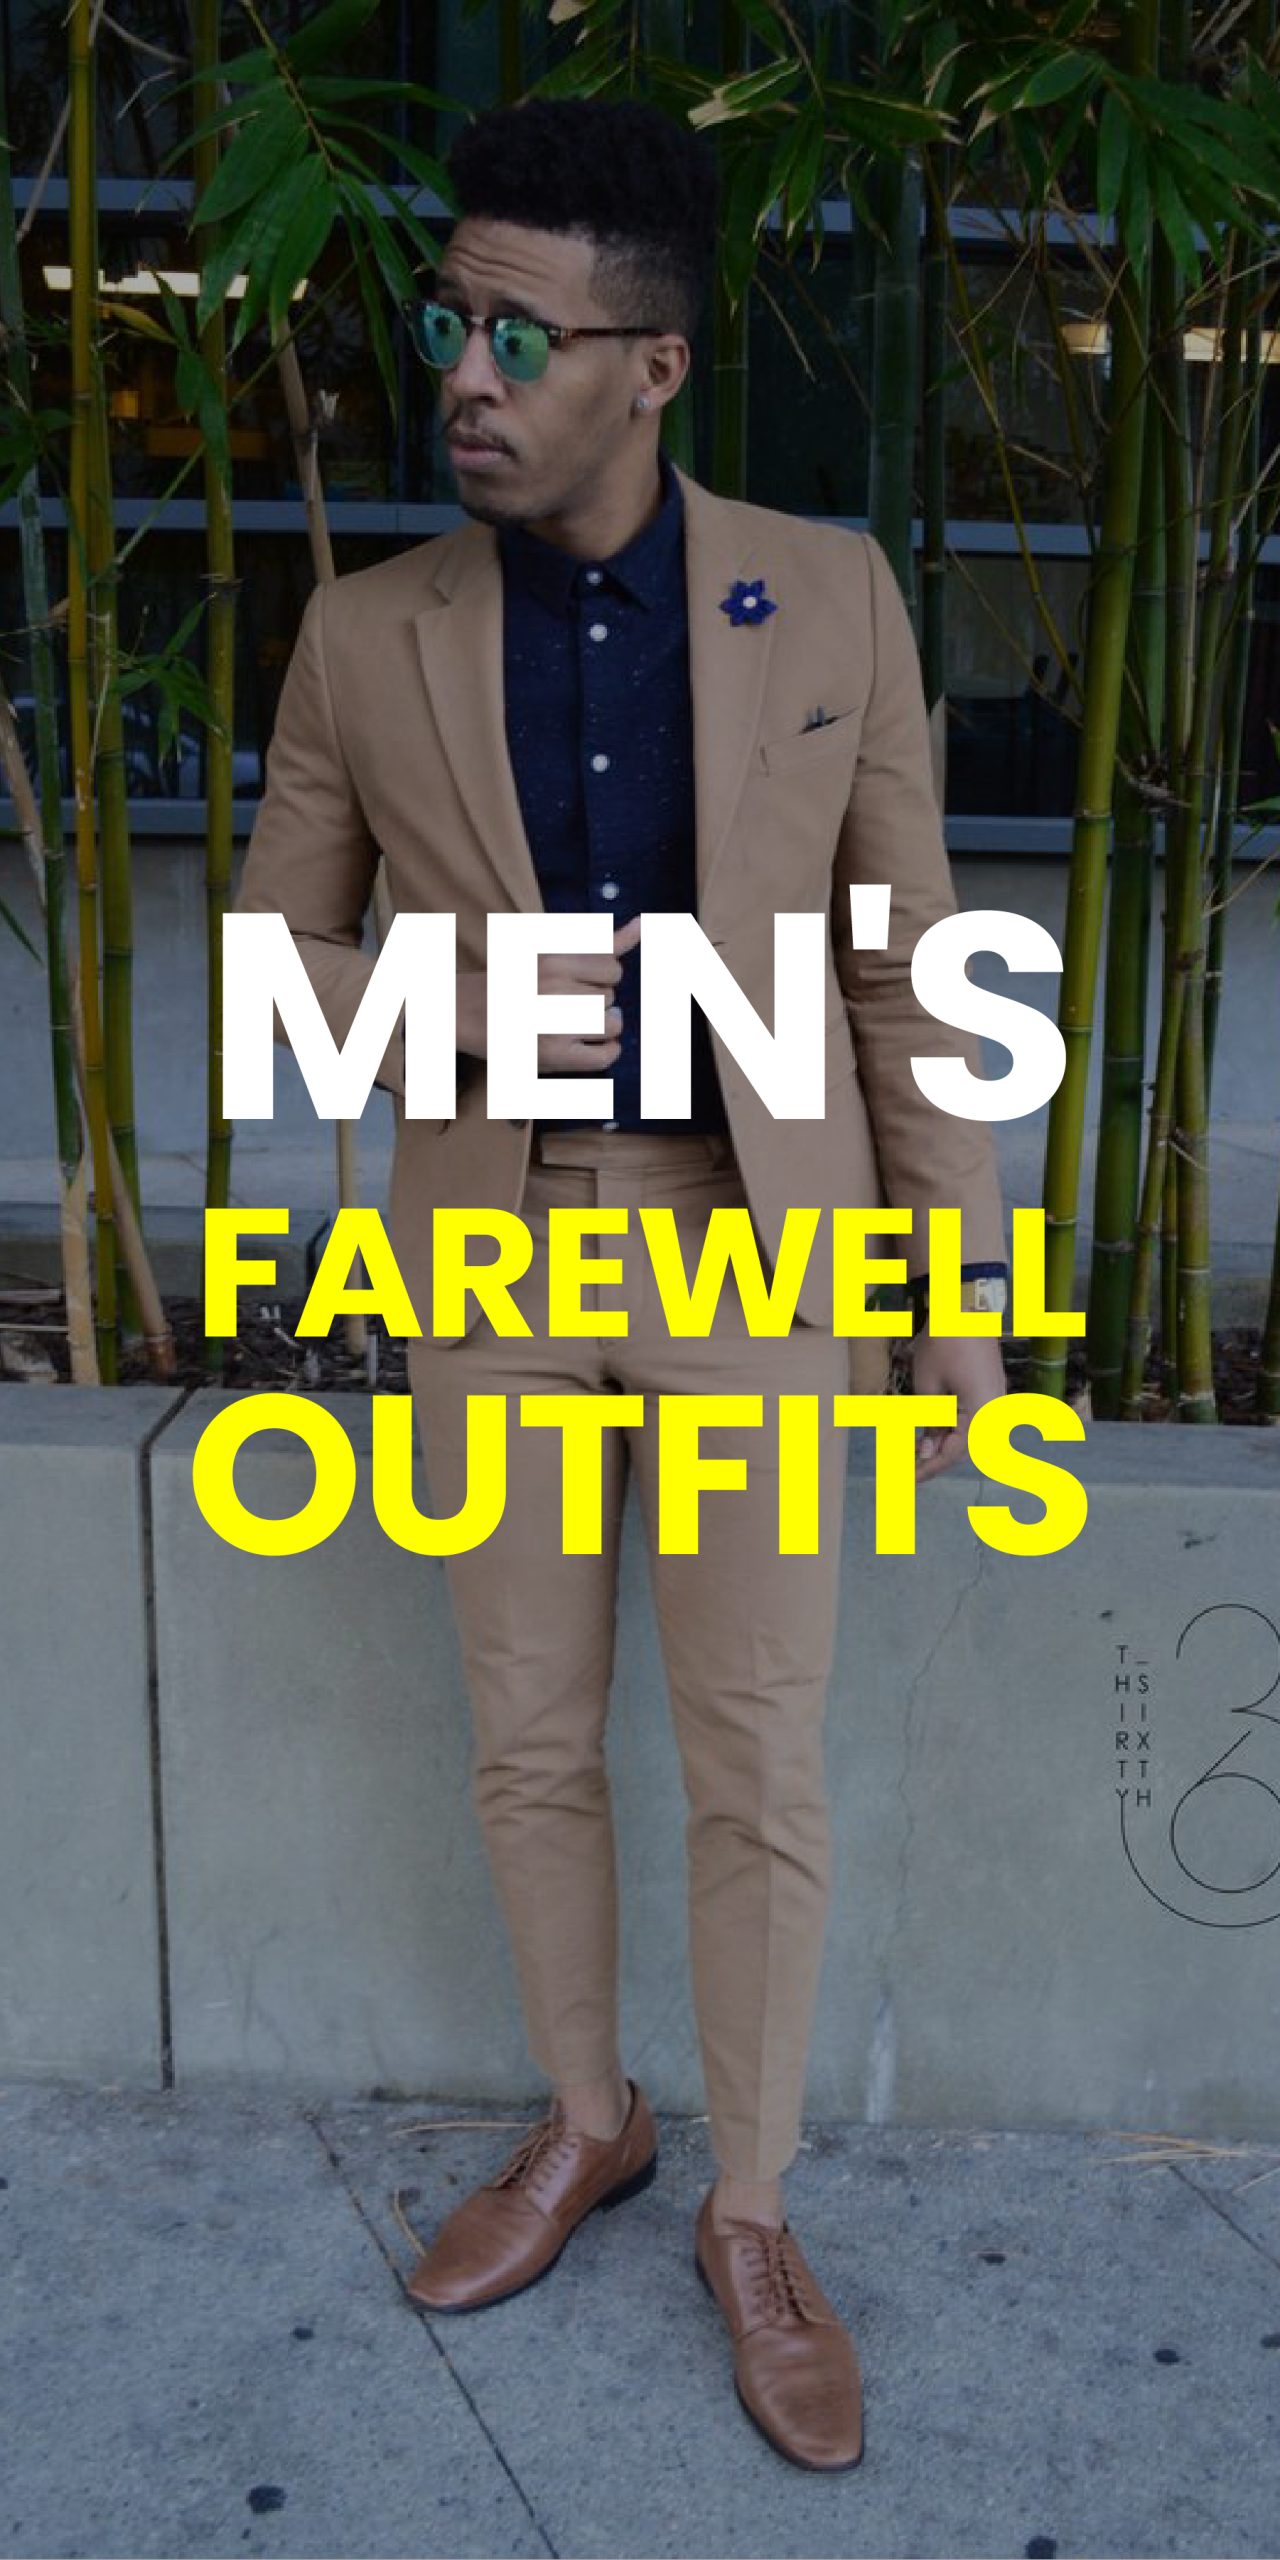 MEN’S FAREWELL OUTFITS